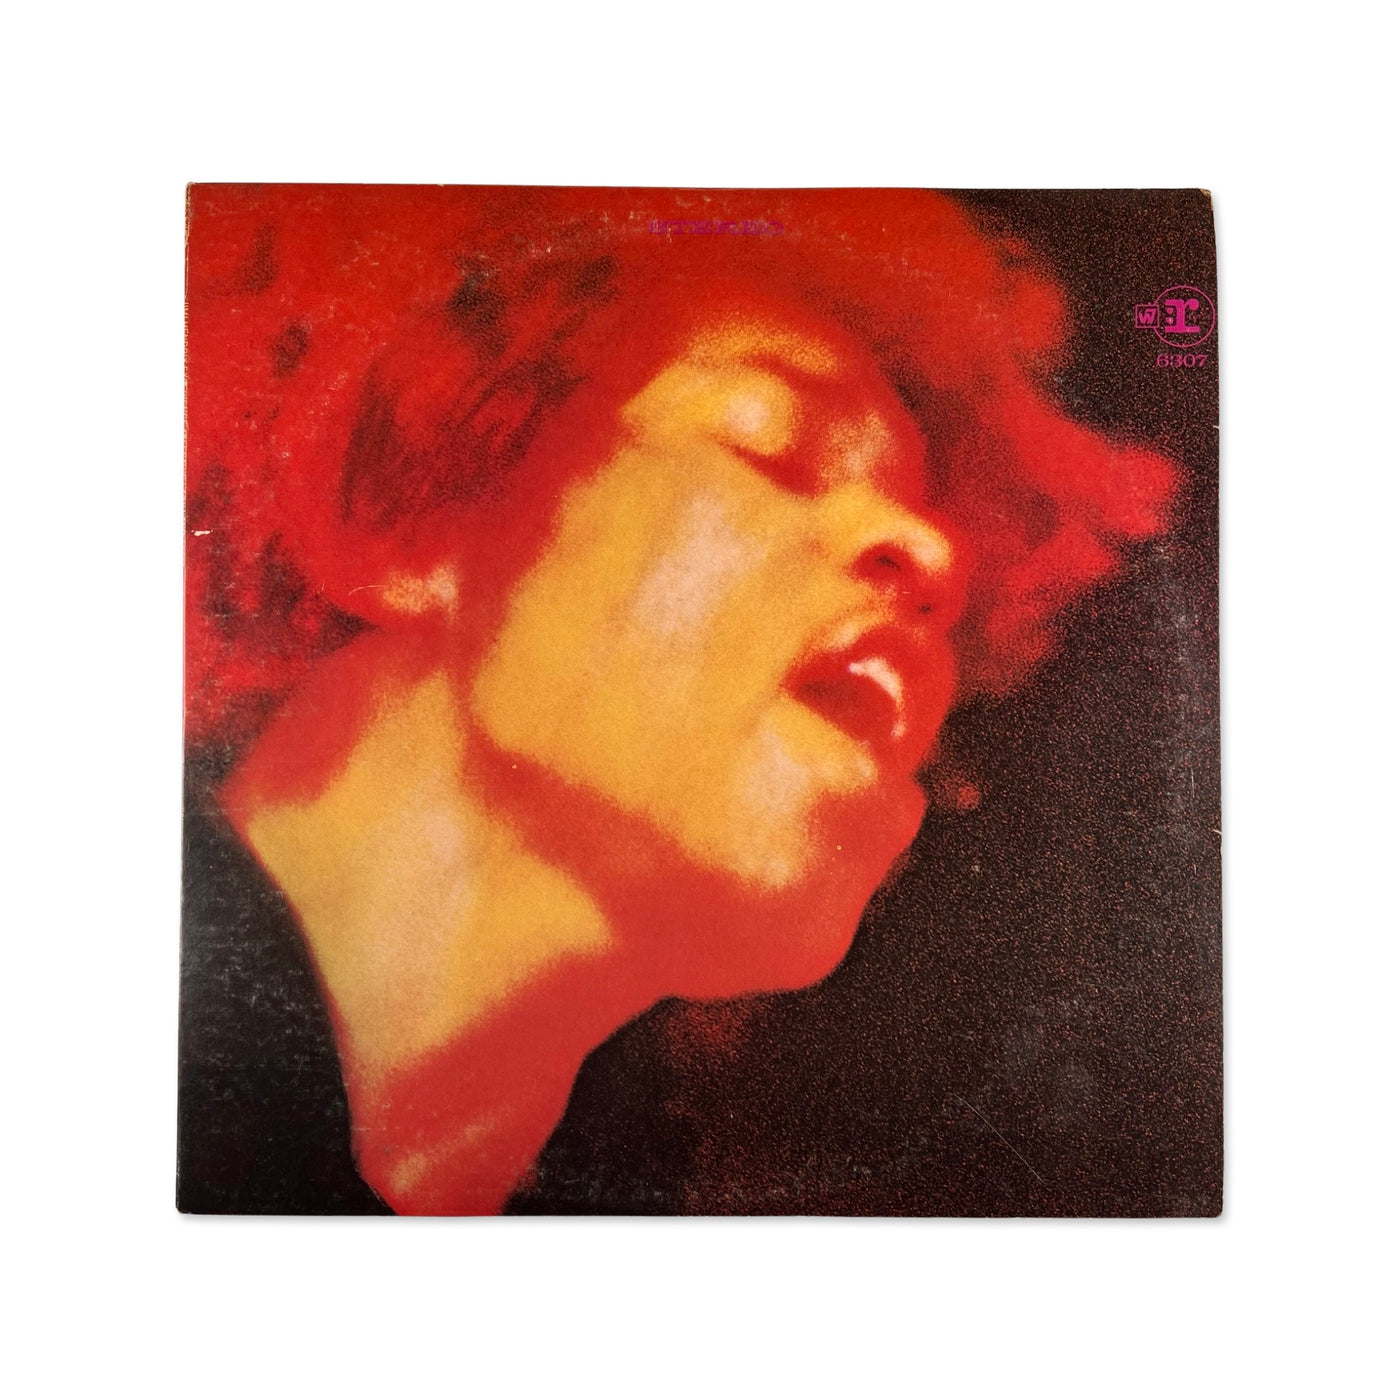 The Jimi Hendrix Experience – Electric Ladyland - 1975 Winchester Reissue